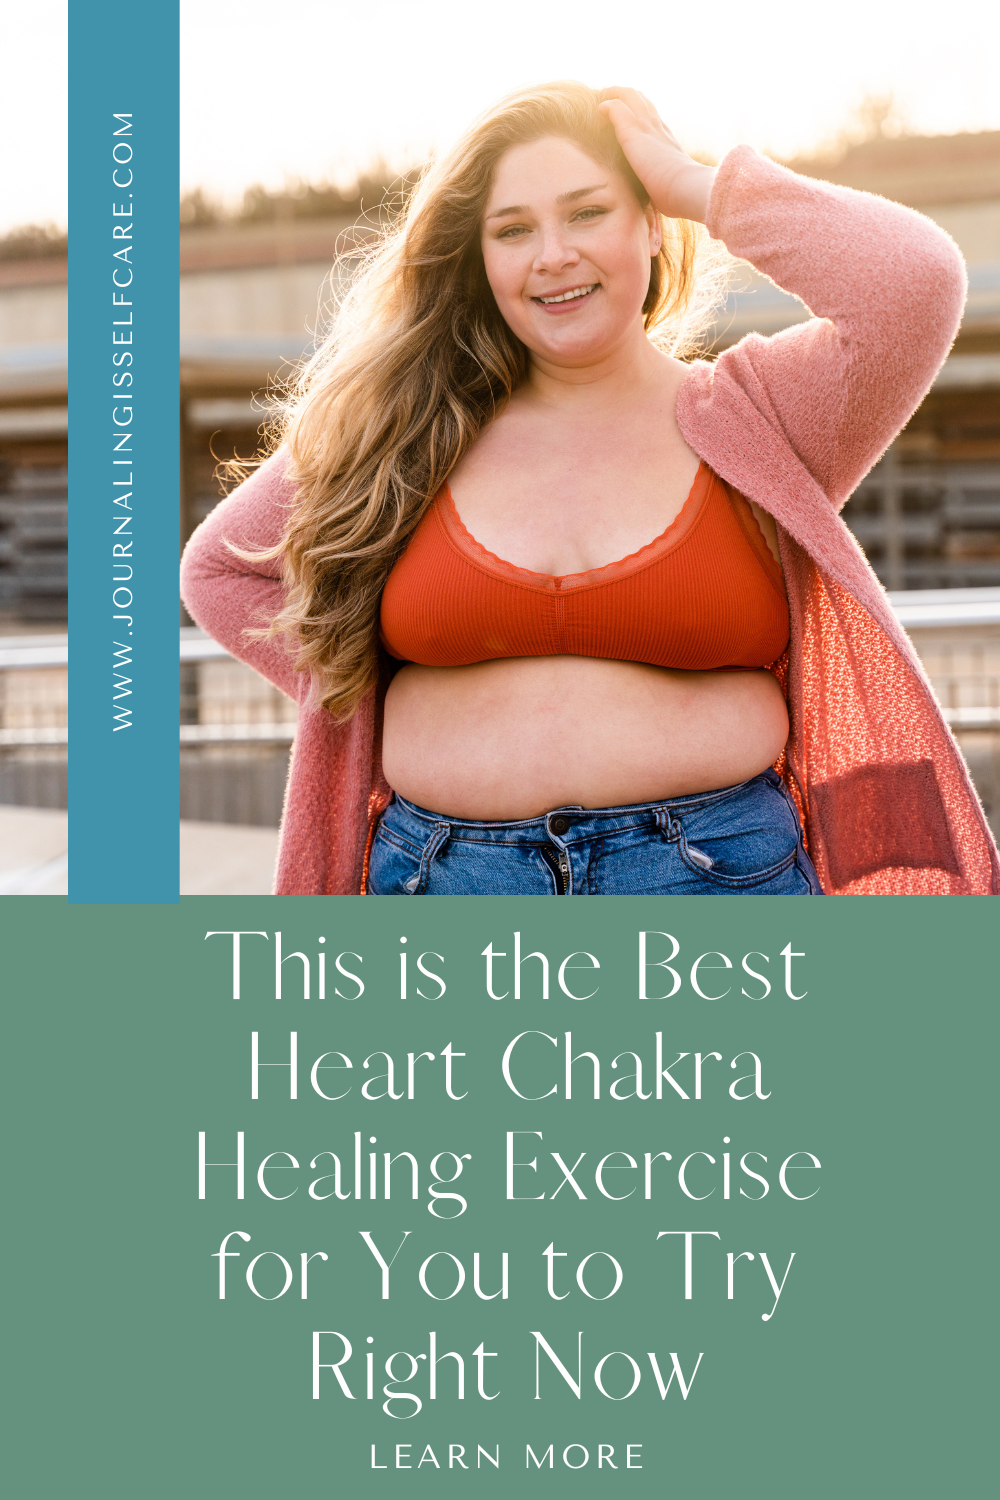 This is the Best Heart Chakra Healing Exercise for You to Try Right Now